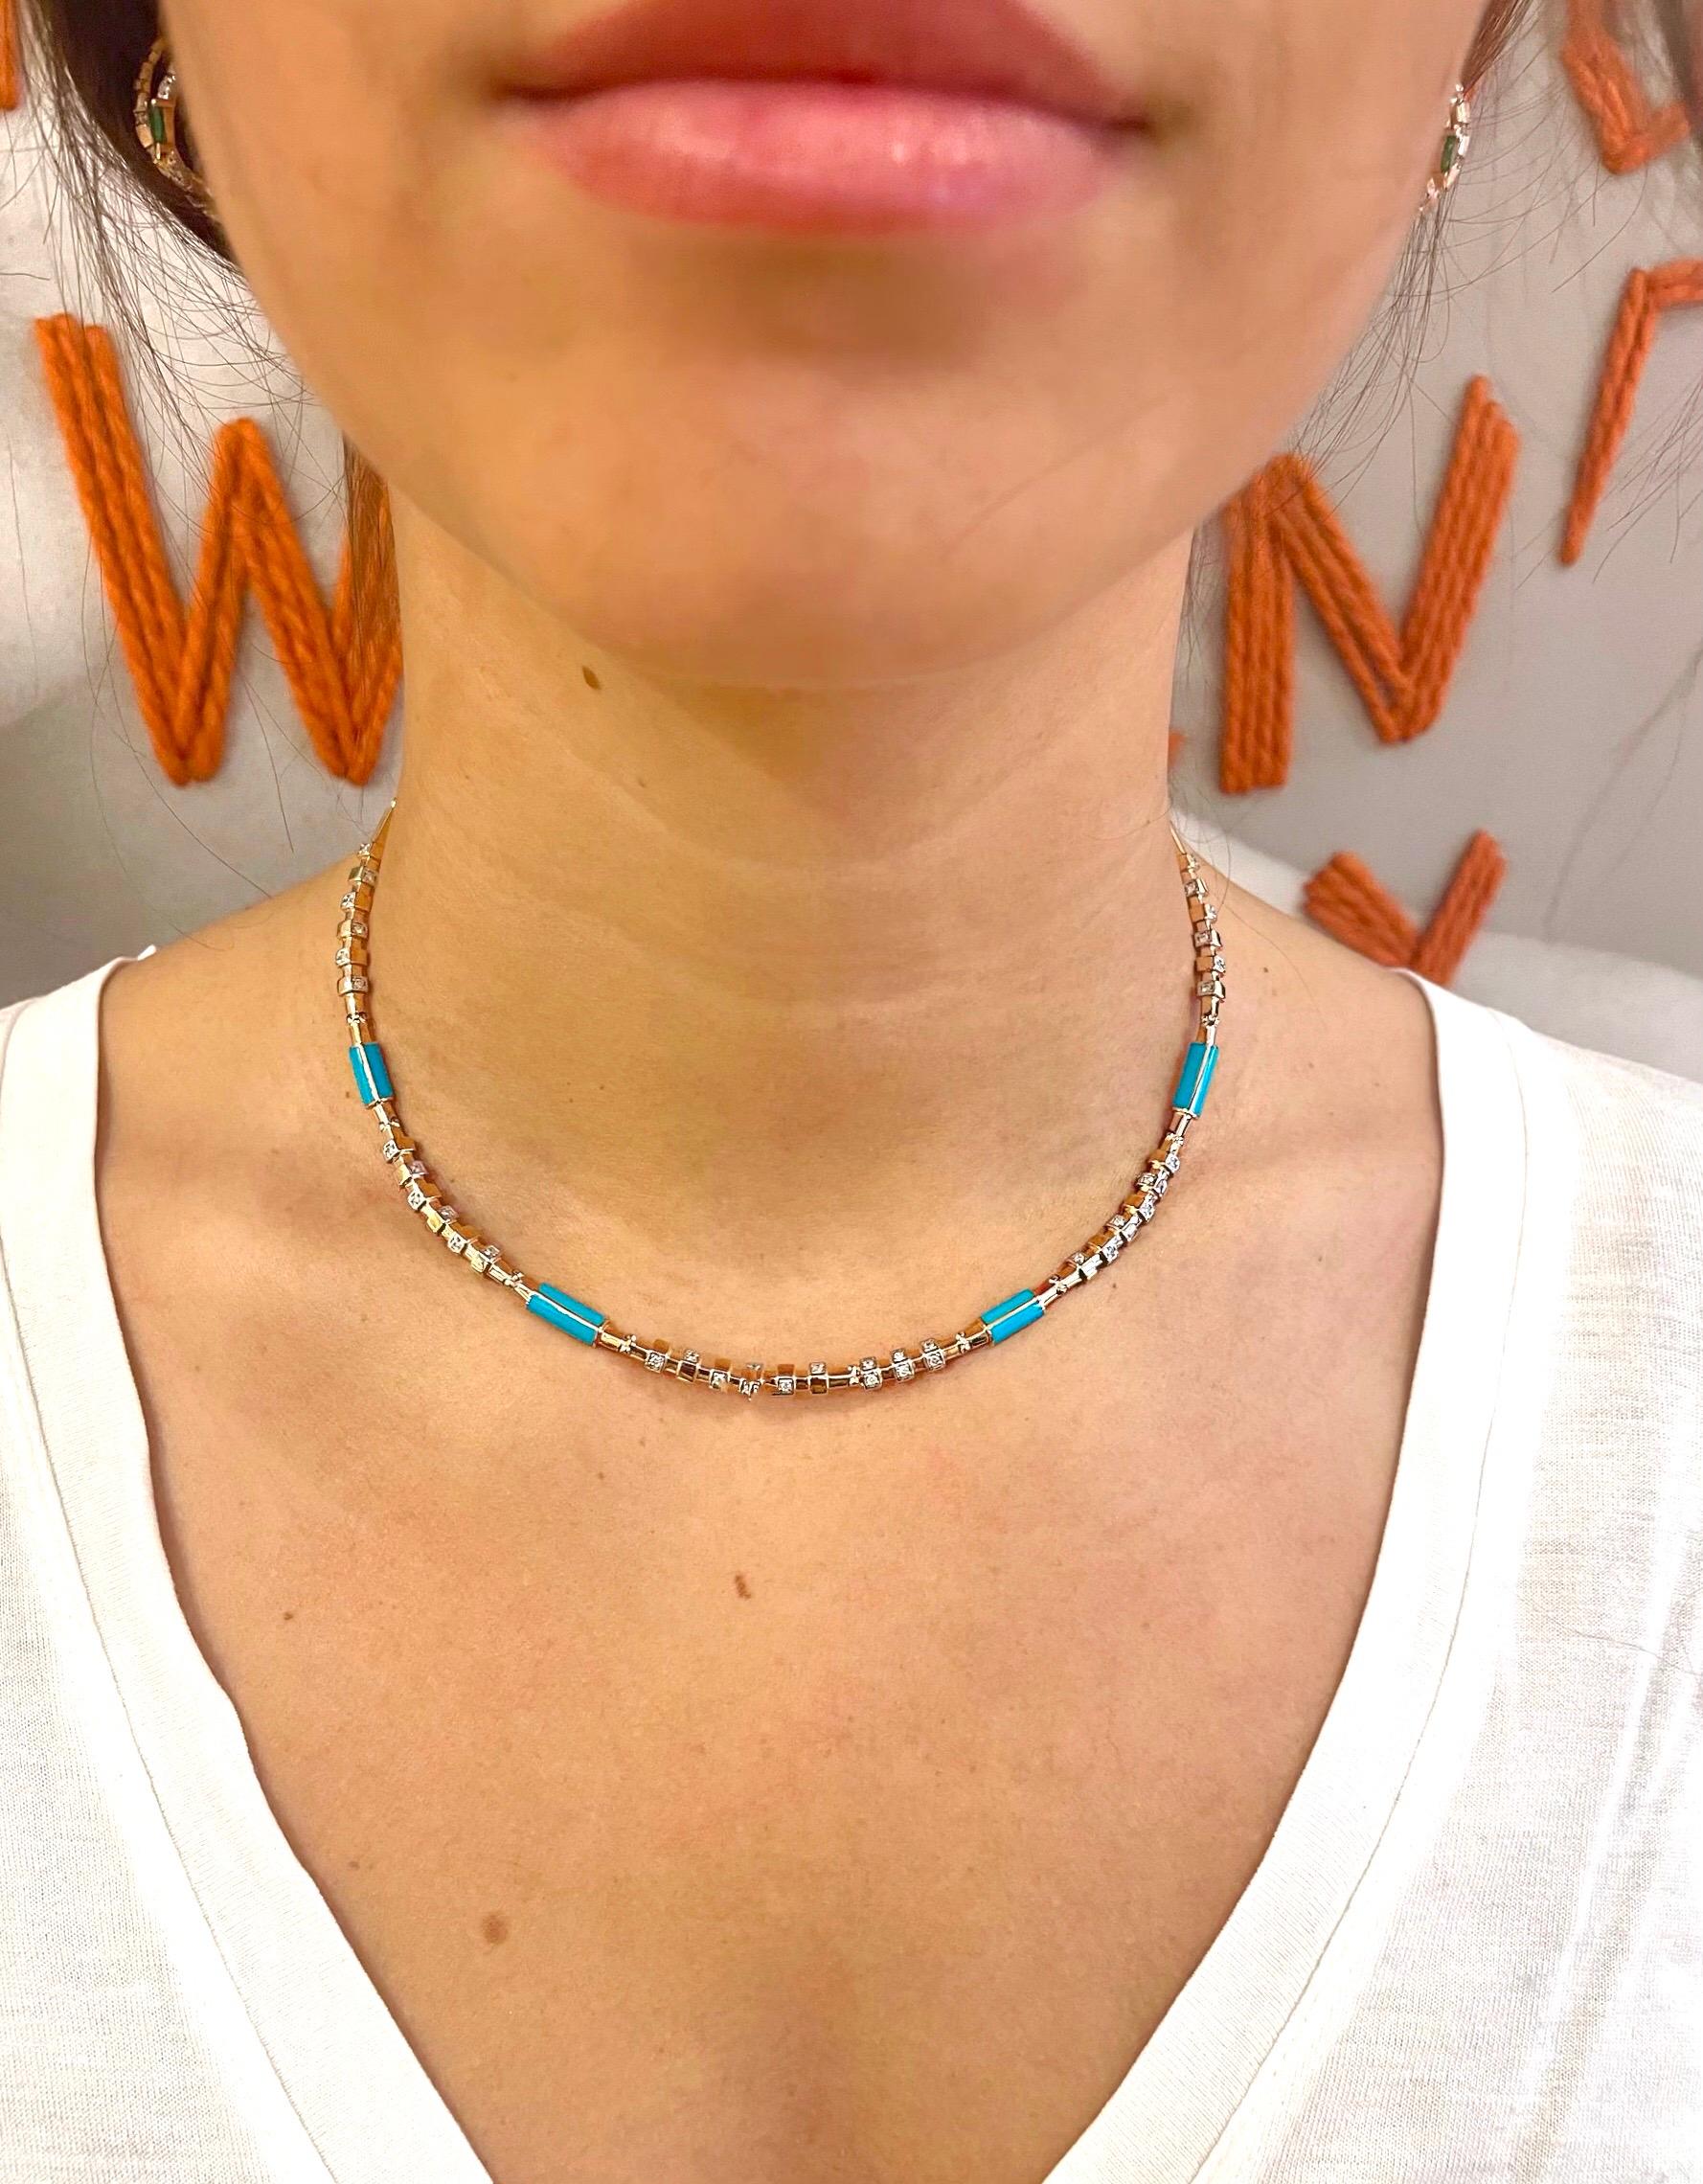 Taotie Necklace in Rose Gold with White Diamond and Turquoise Enamel In New Condition For Sale In Istanbul, TR